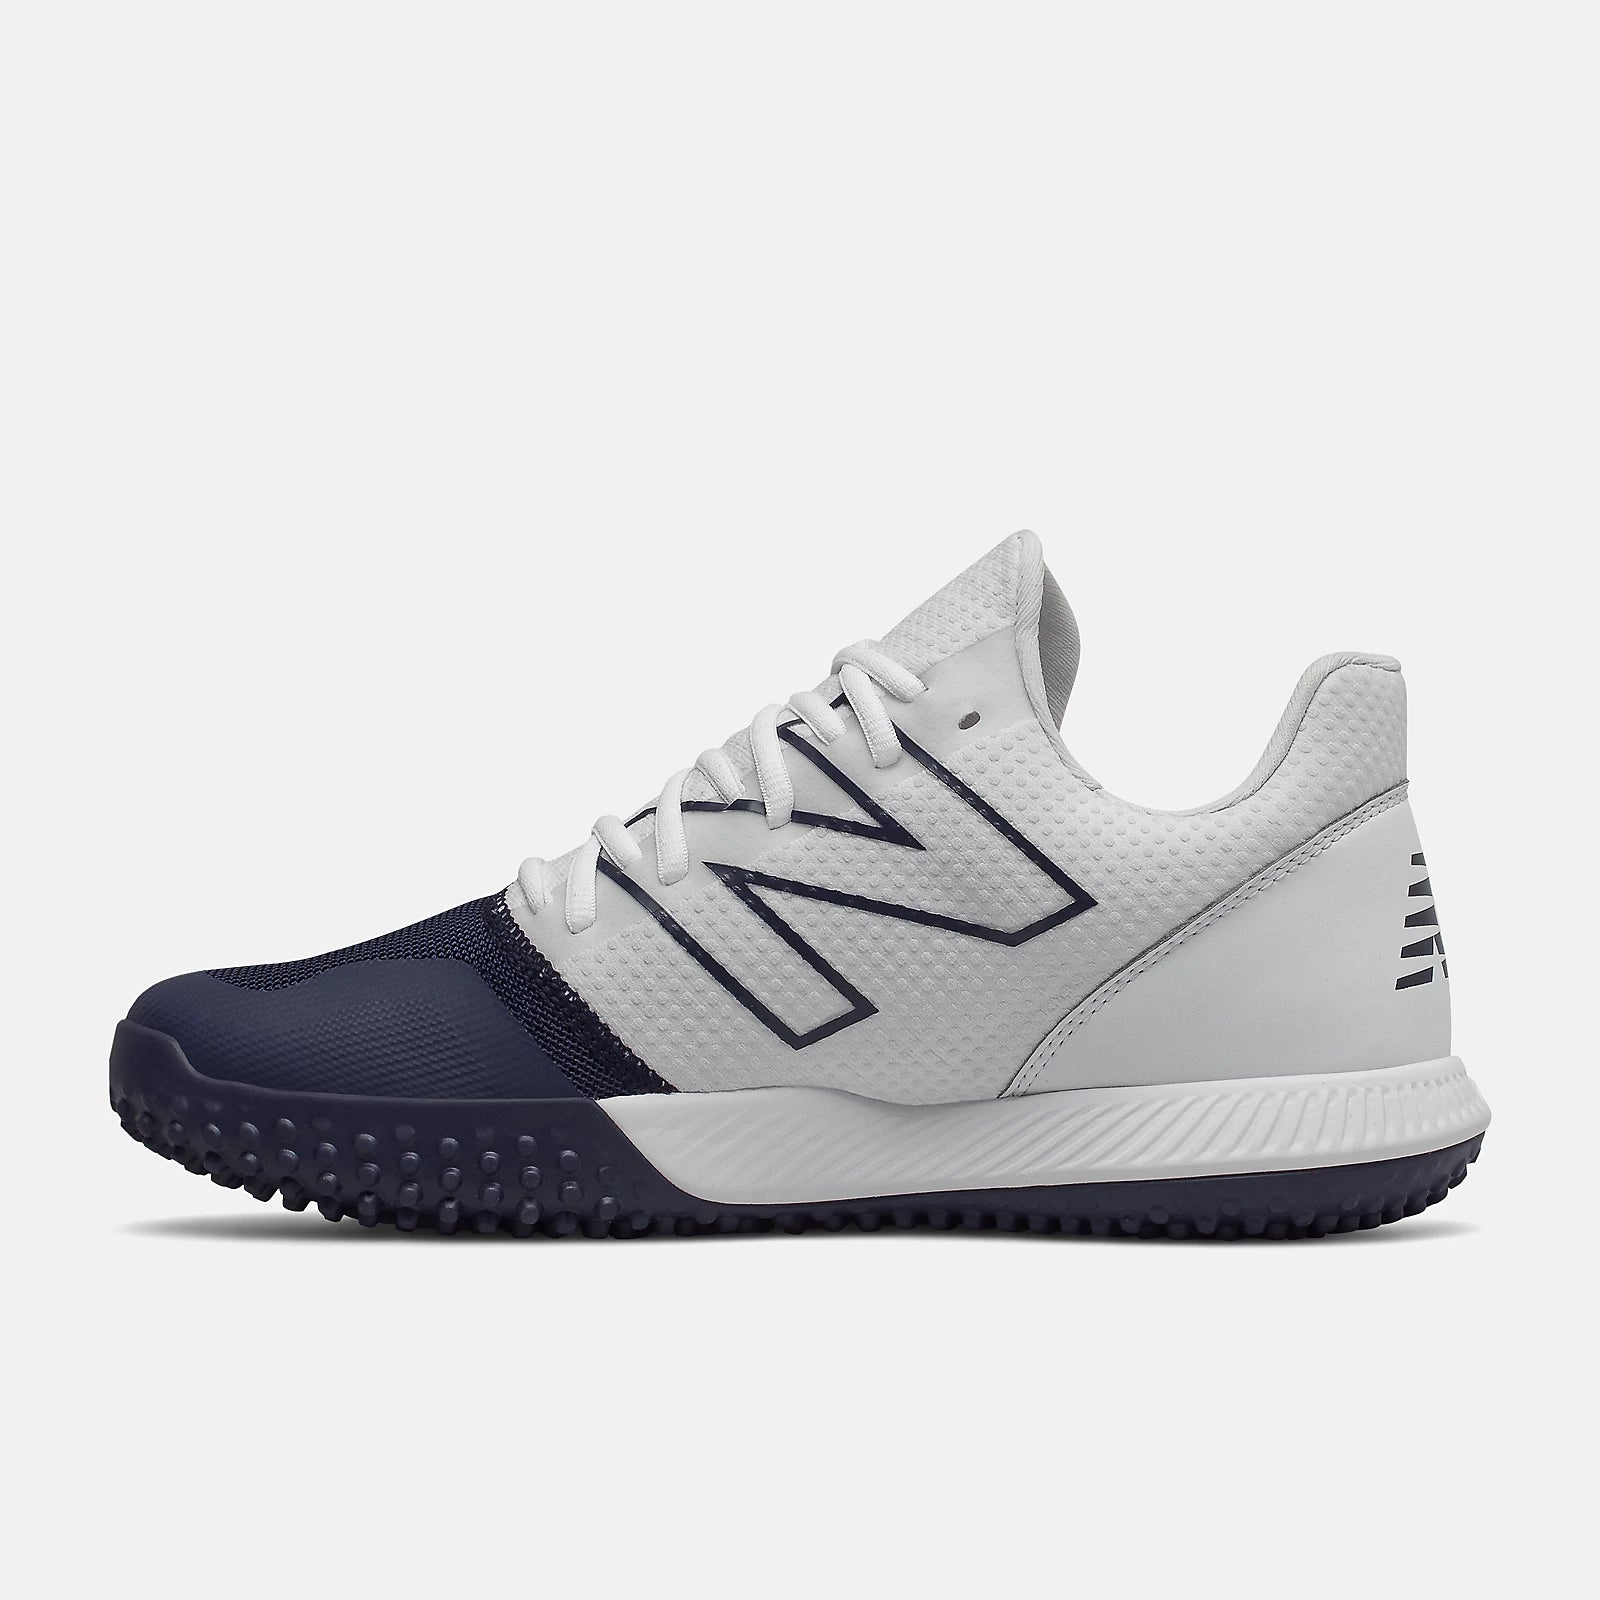 New Balance Turf Shoe - Navy/White FuelCell 4040v6 (T4040TN6)